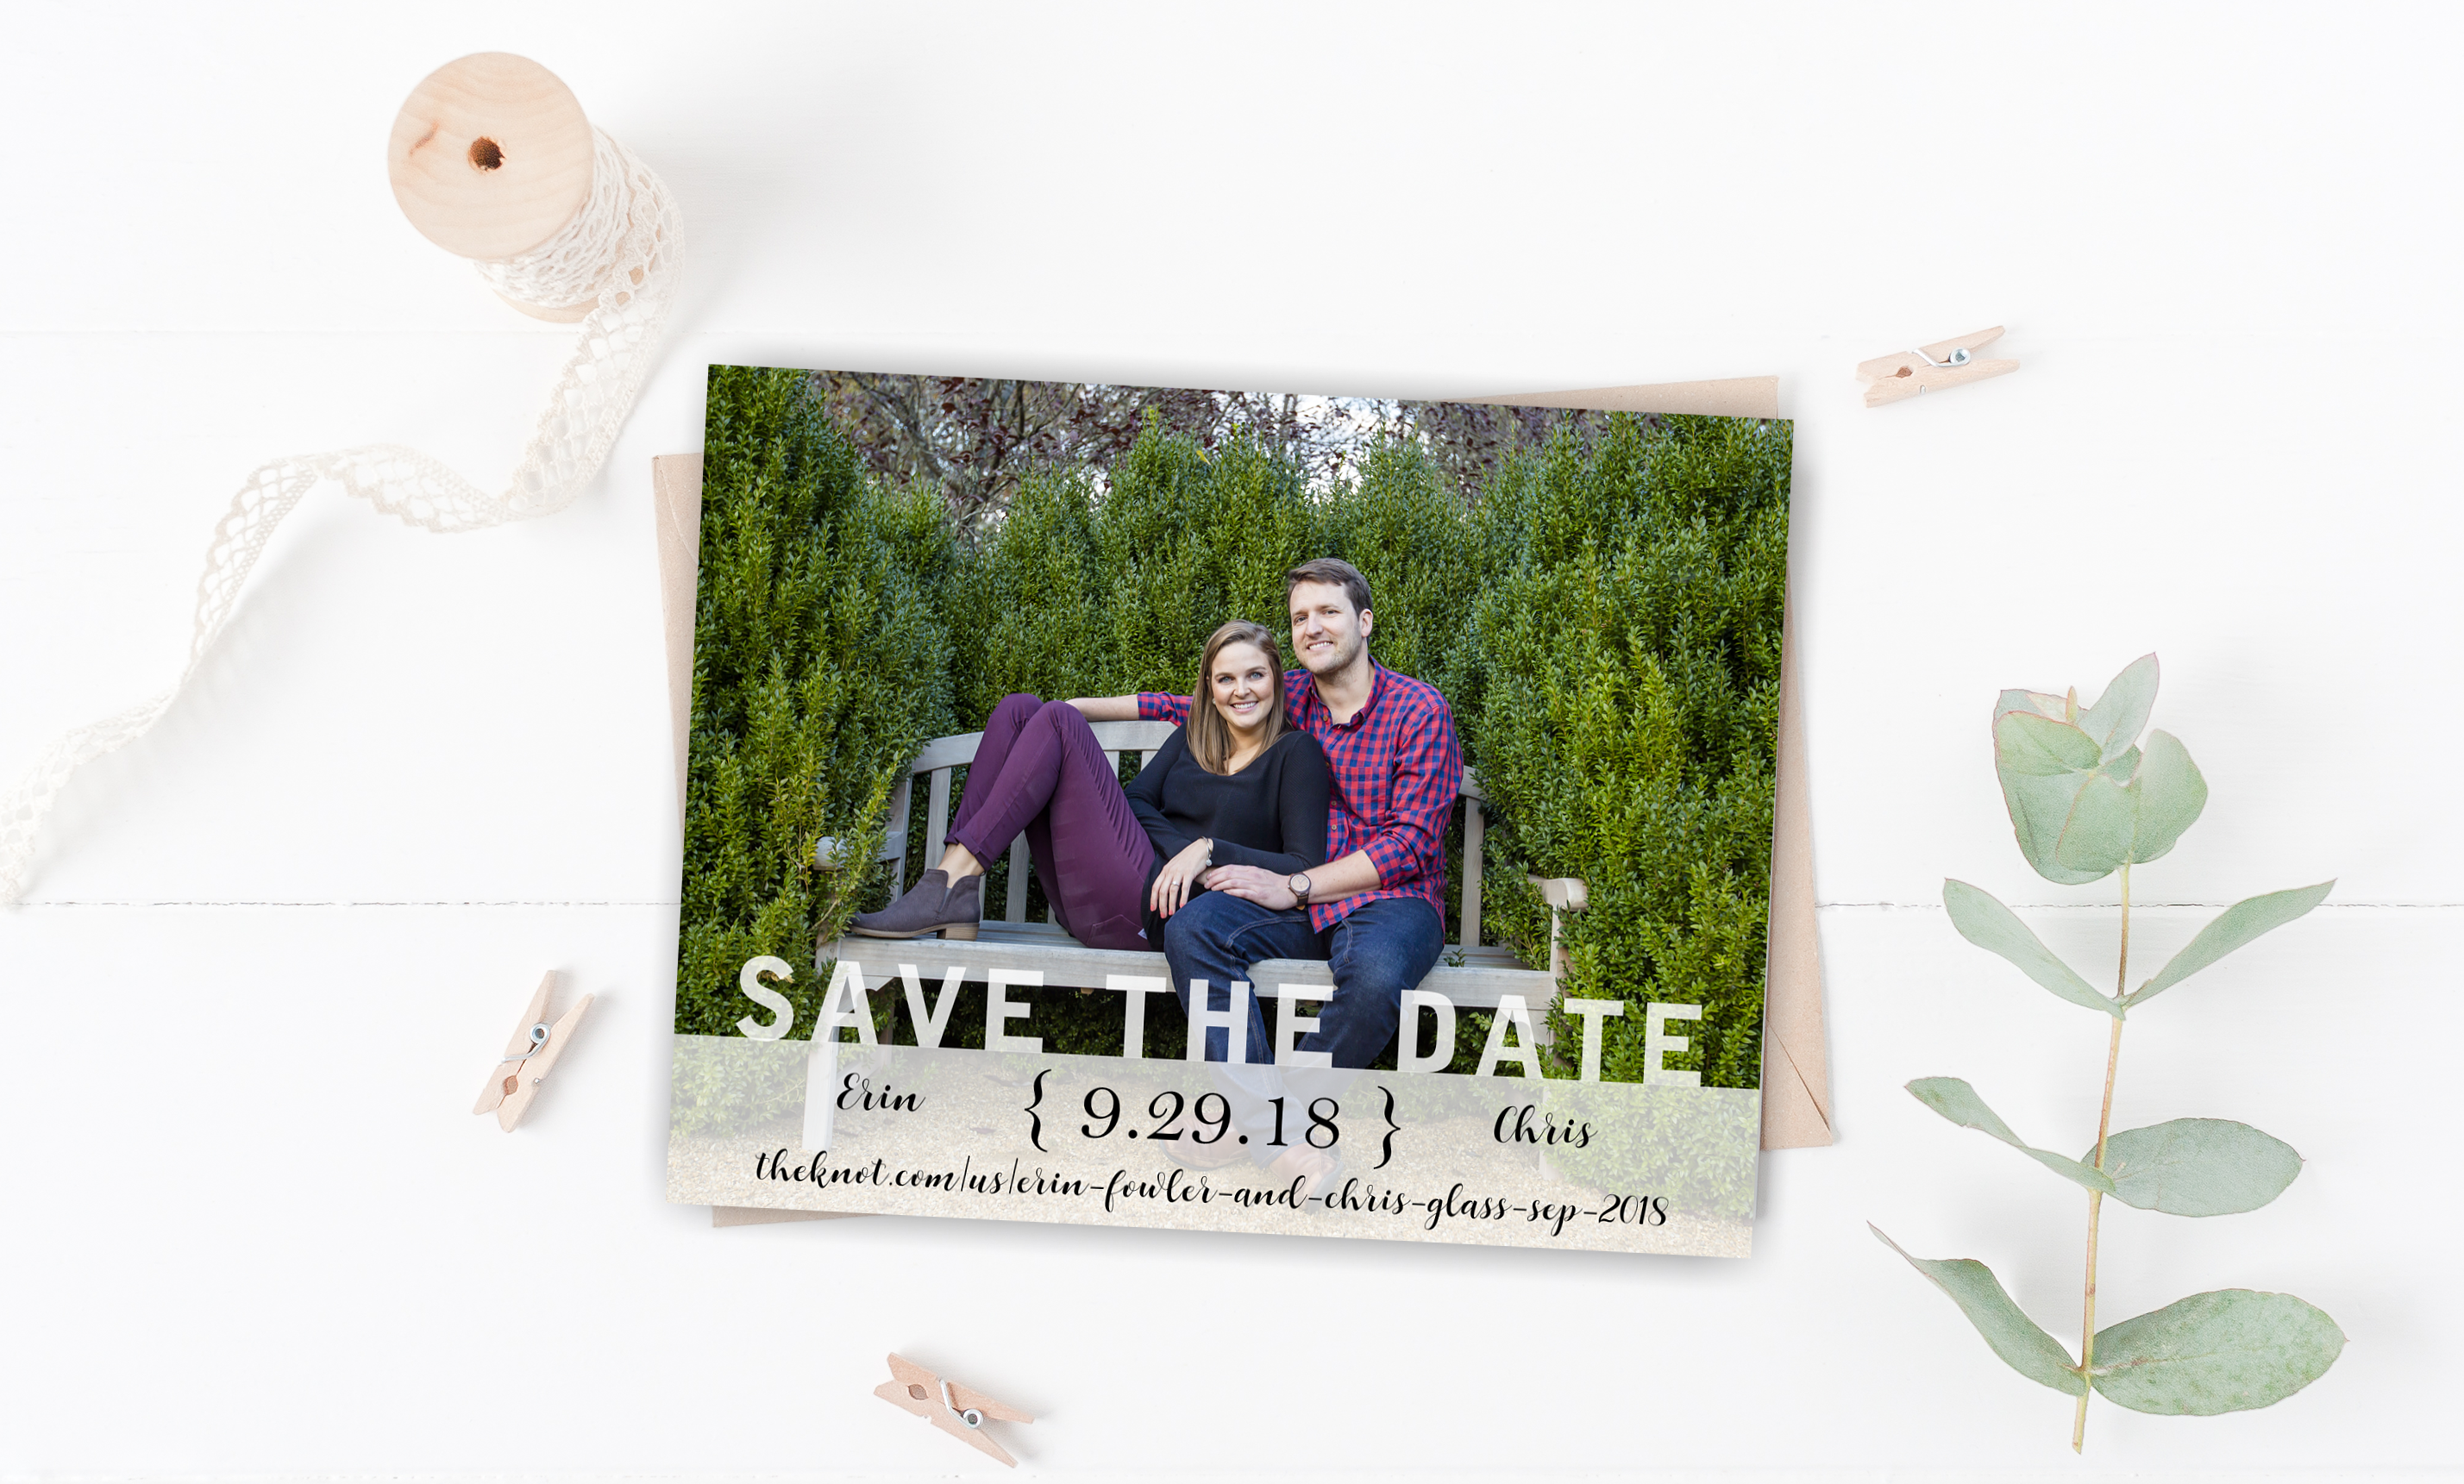 How Do You Send Out Save the Date Magnets?